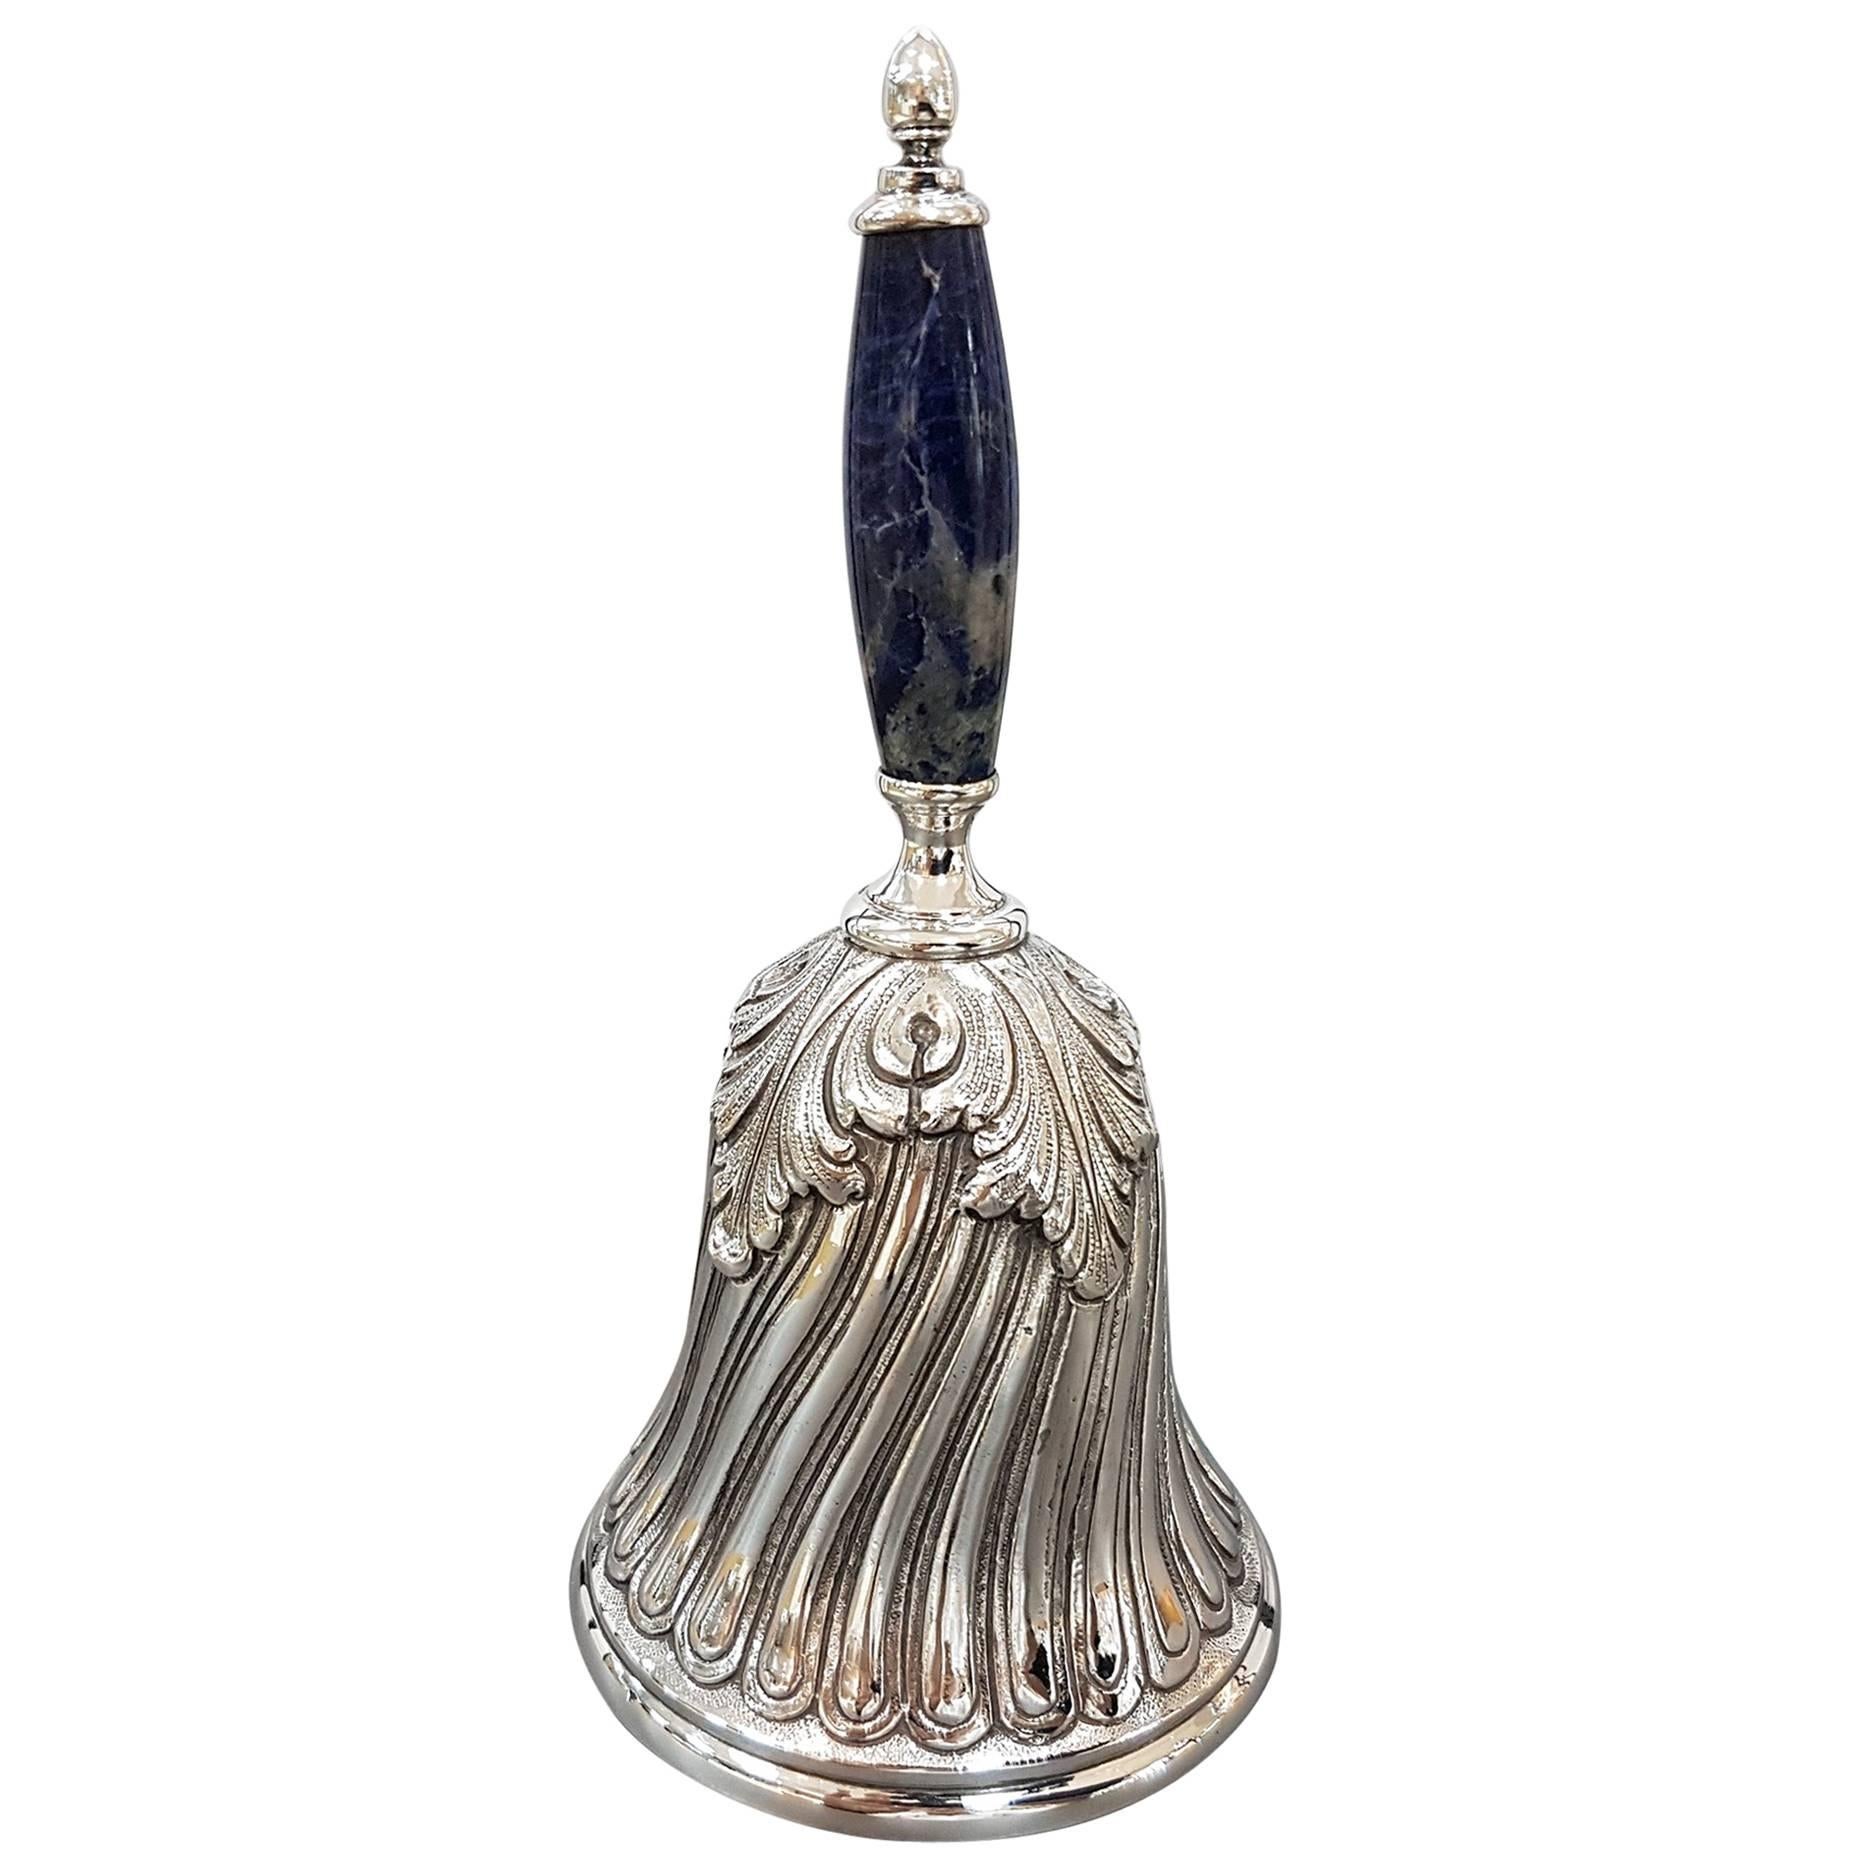 20th Century Sterling Silver Table Bell